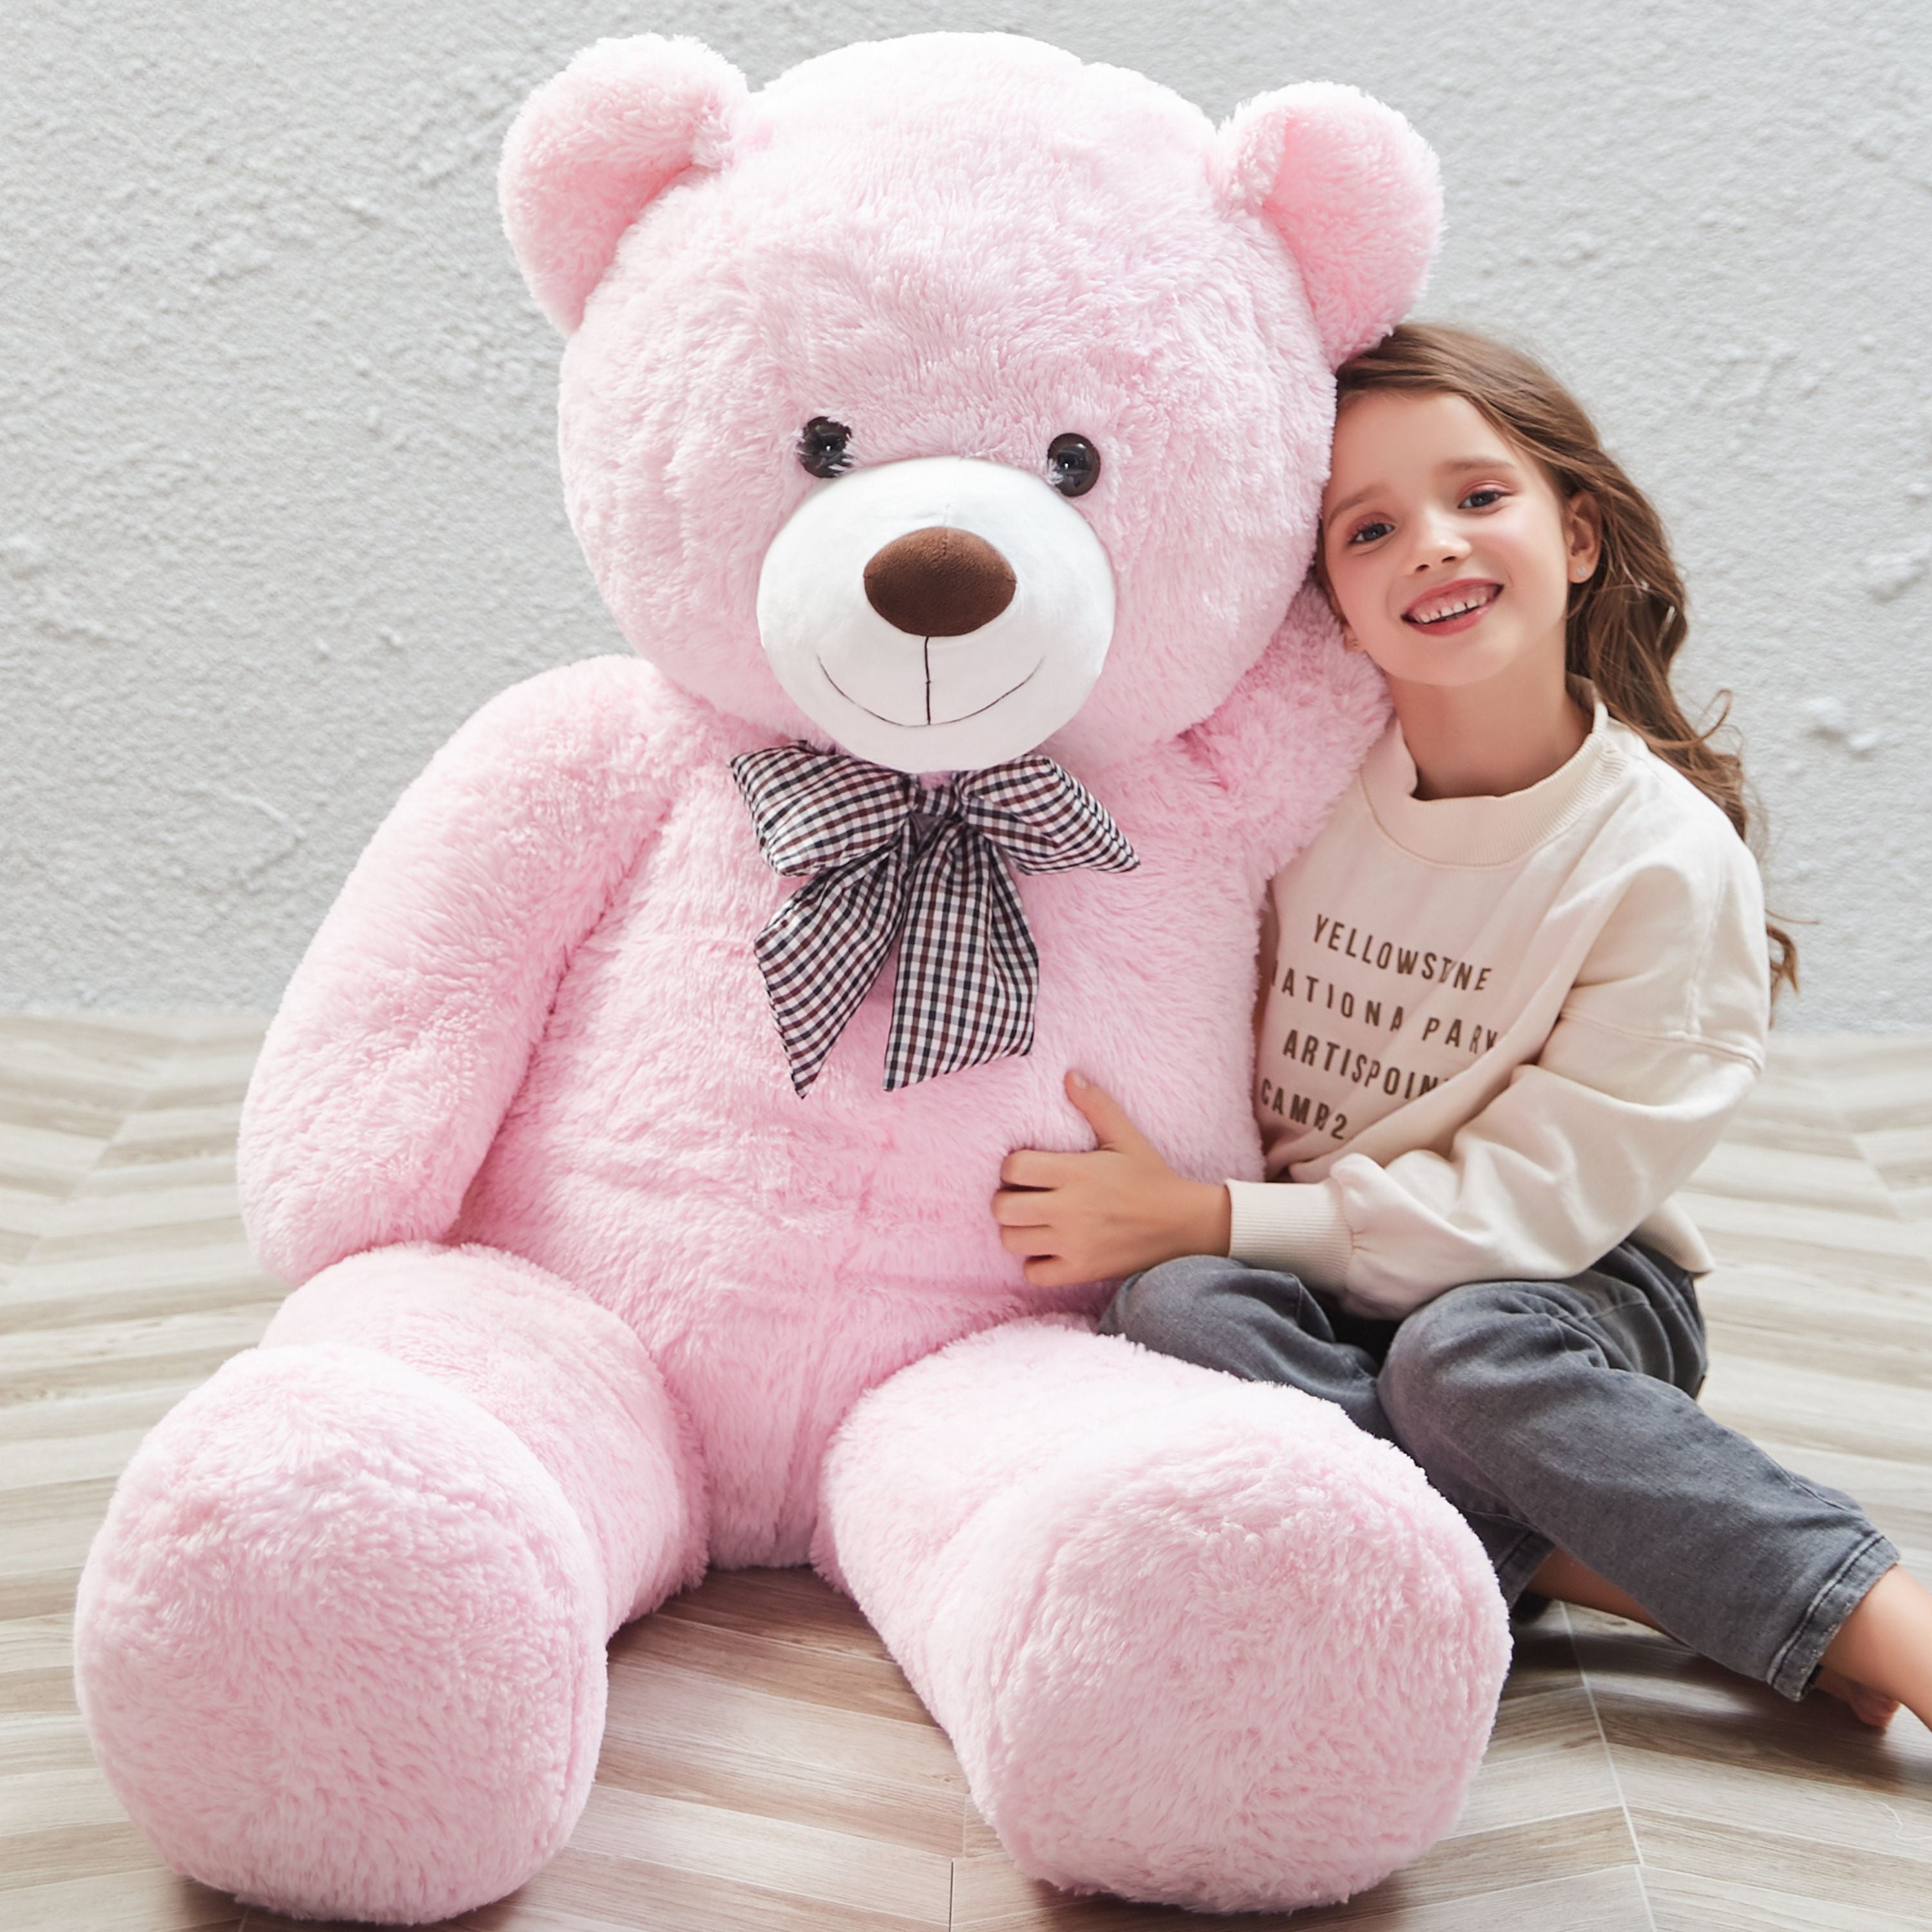 Misscindy Giant Teddy Bear Plush Stuffed Animals for Girlfriend or Kids 47 inch (Pink)